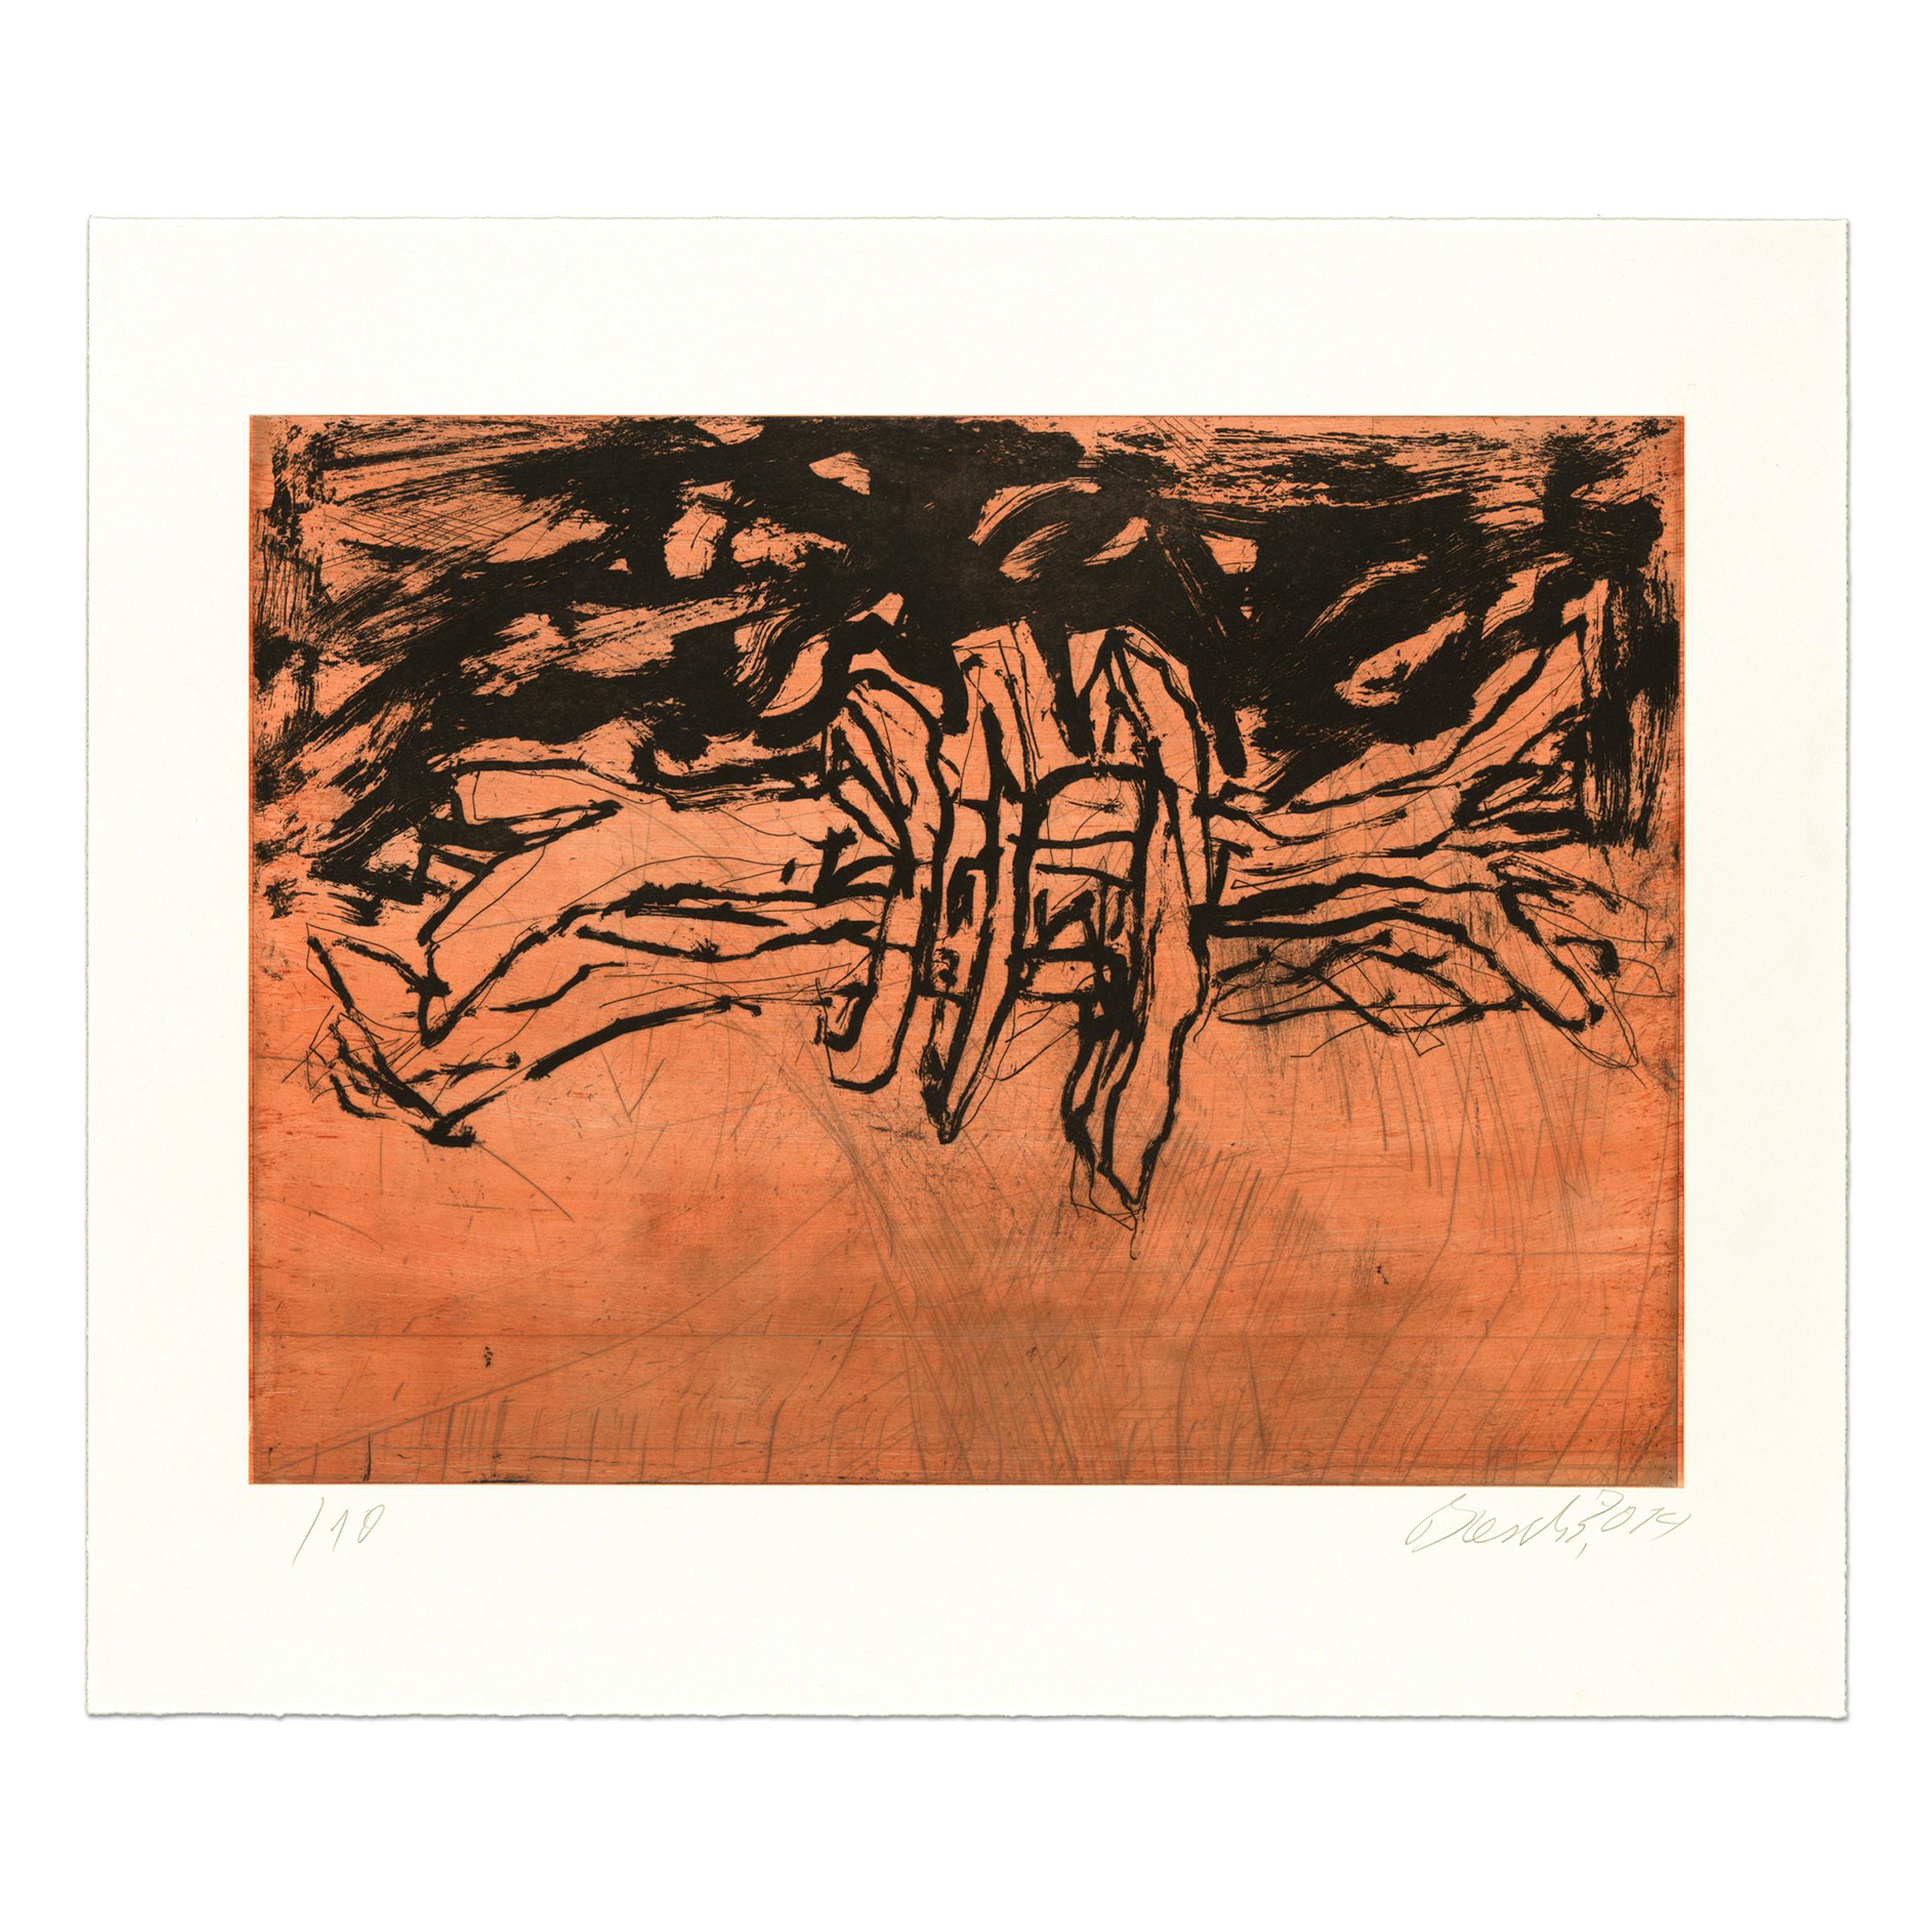 Georg Baselitz (German, born 1938)
Winterschlaf I, 2014
Medium: Line etching and sugar lift aquatint on wove paper
Dimensions: 69 x 82 cm
Edition of 10: Hand-signed, numbered and dated
Condition: Excellent